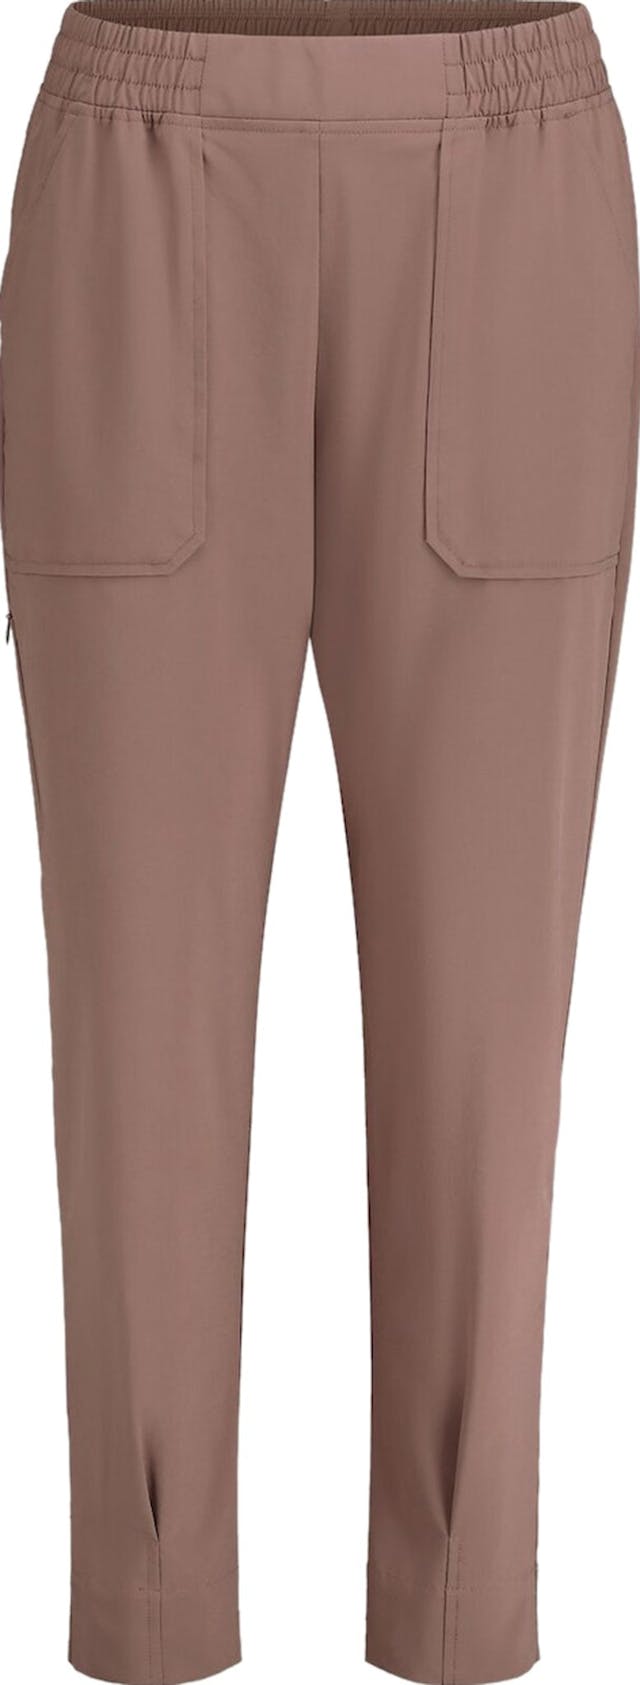 Product image for Kamana Tapered Trousers - Women’s 